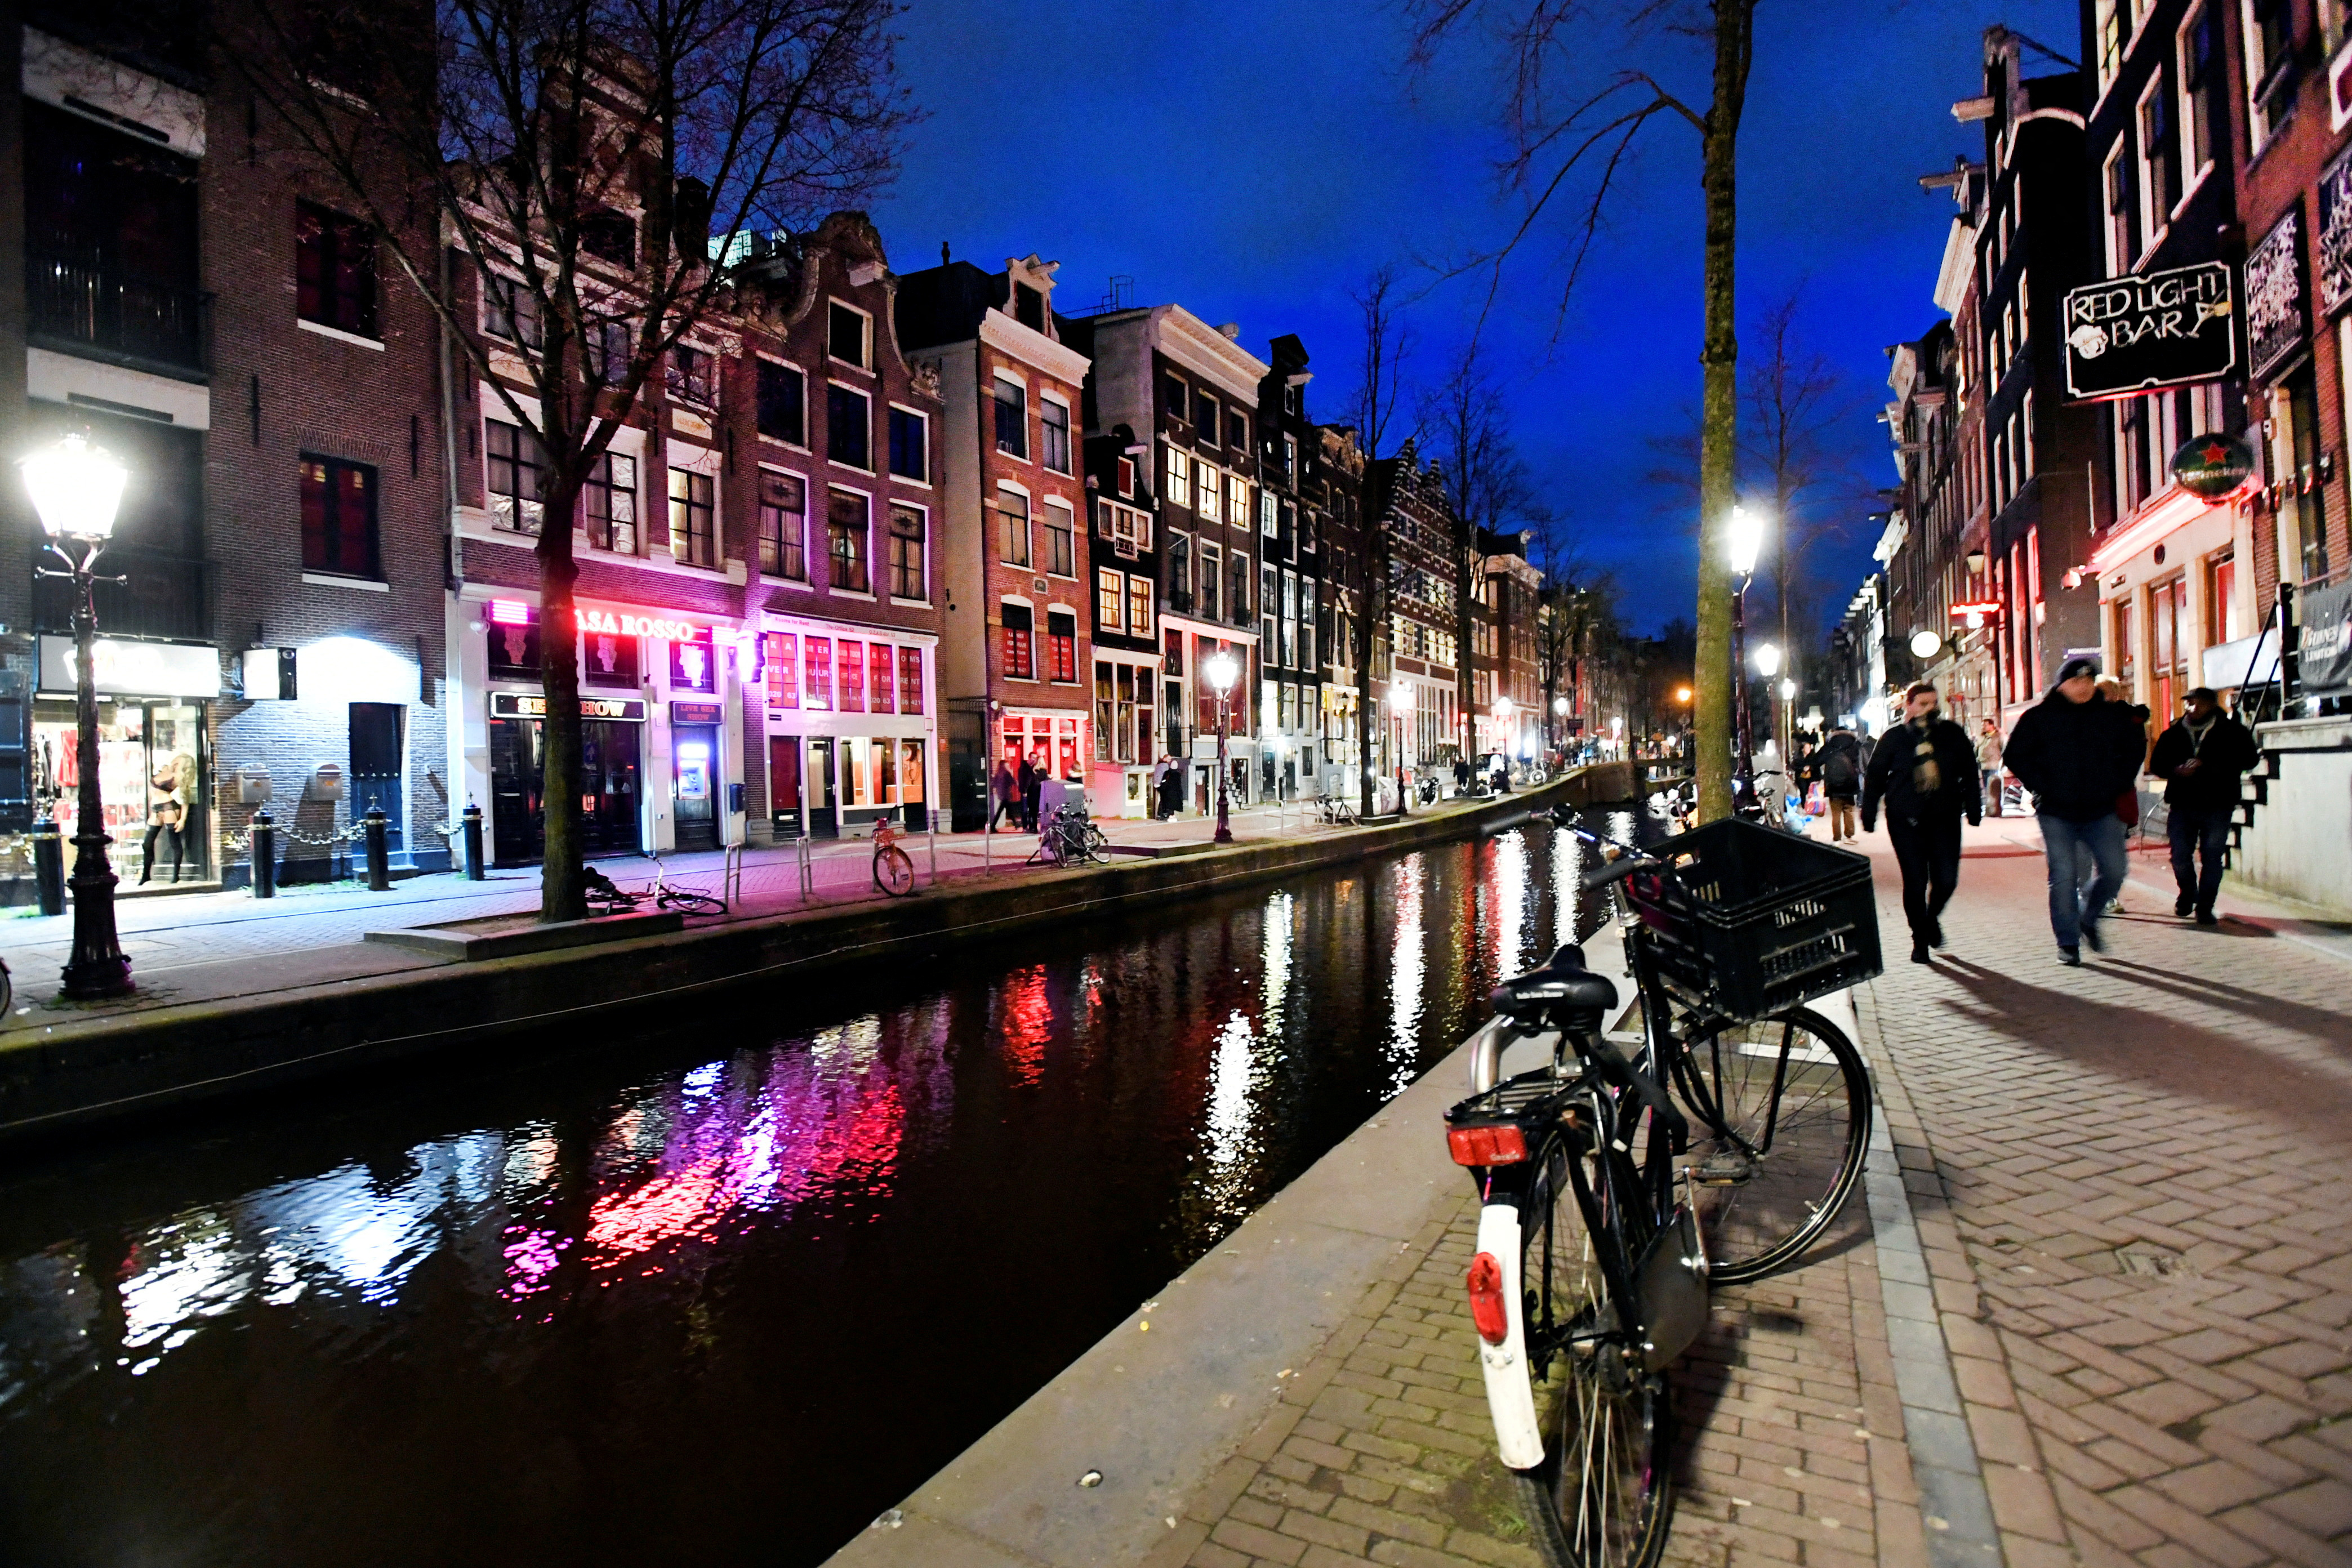 Amsterdam to ban cannabis outdoors in red-light district Reuters photo